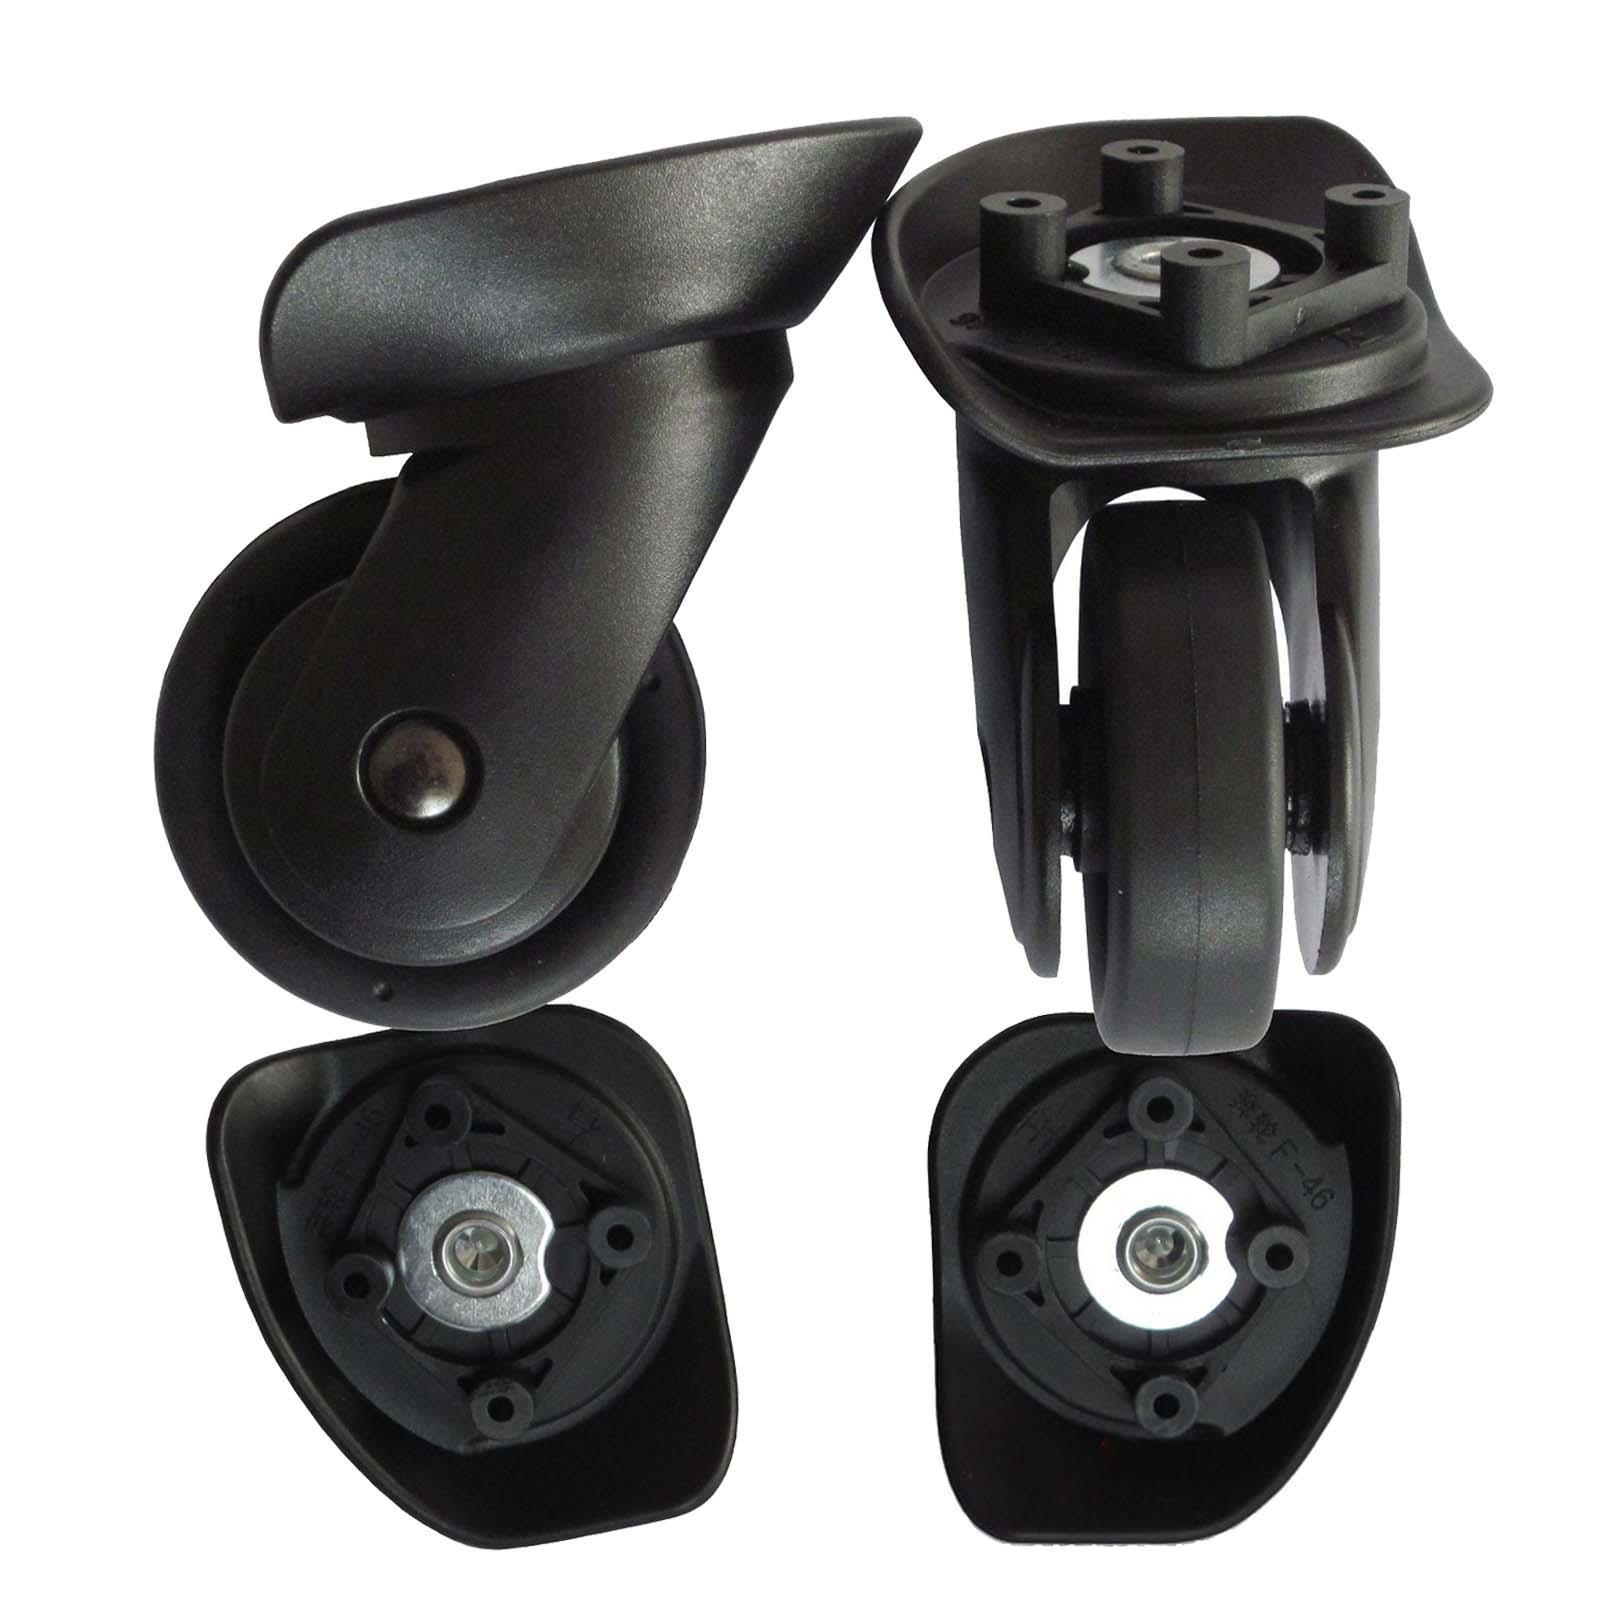 2Pcs Luggage Suitcase Wheels Swivel Caster Wheels for Trolley Travelling Bag